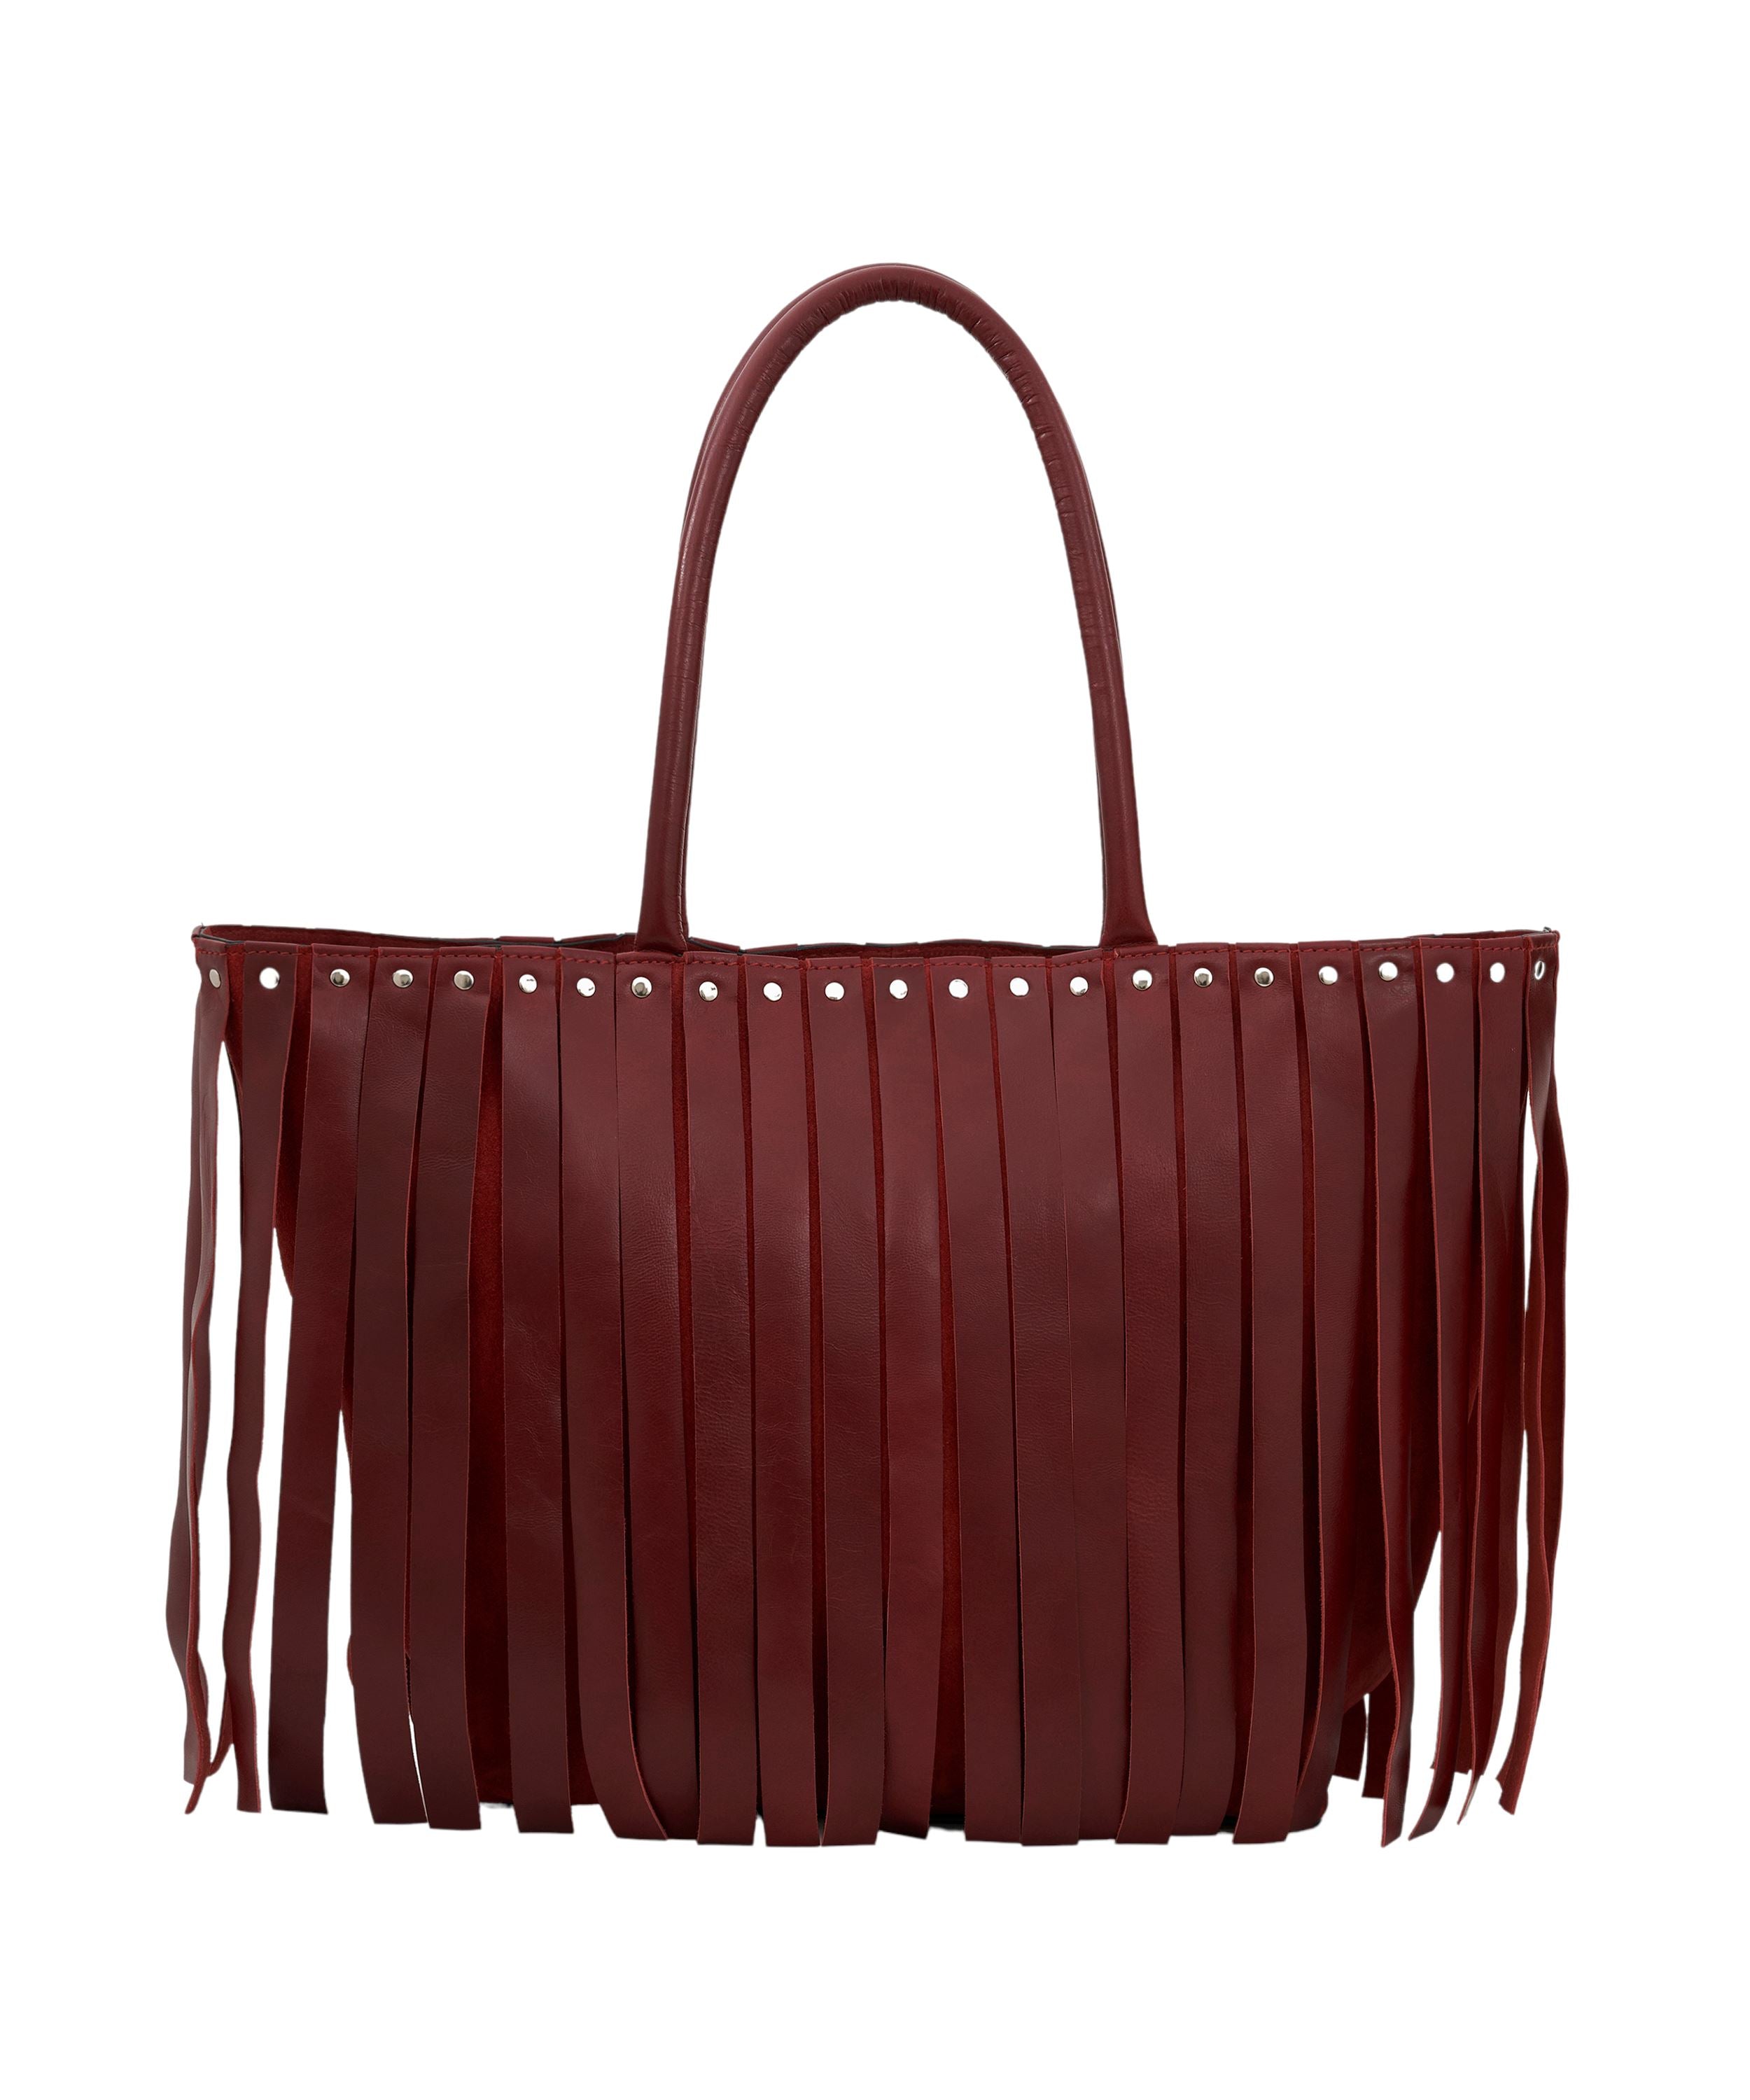 Tassel Tango Tote in Blood Red with Stud Details